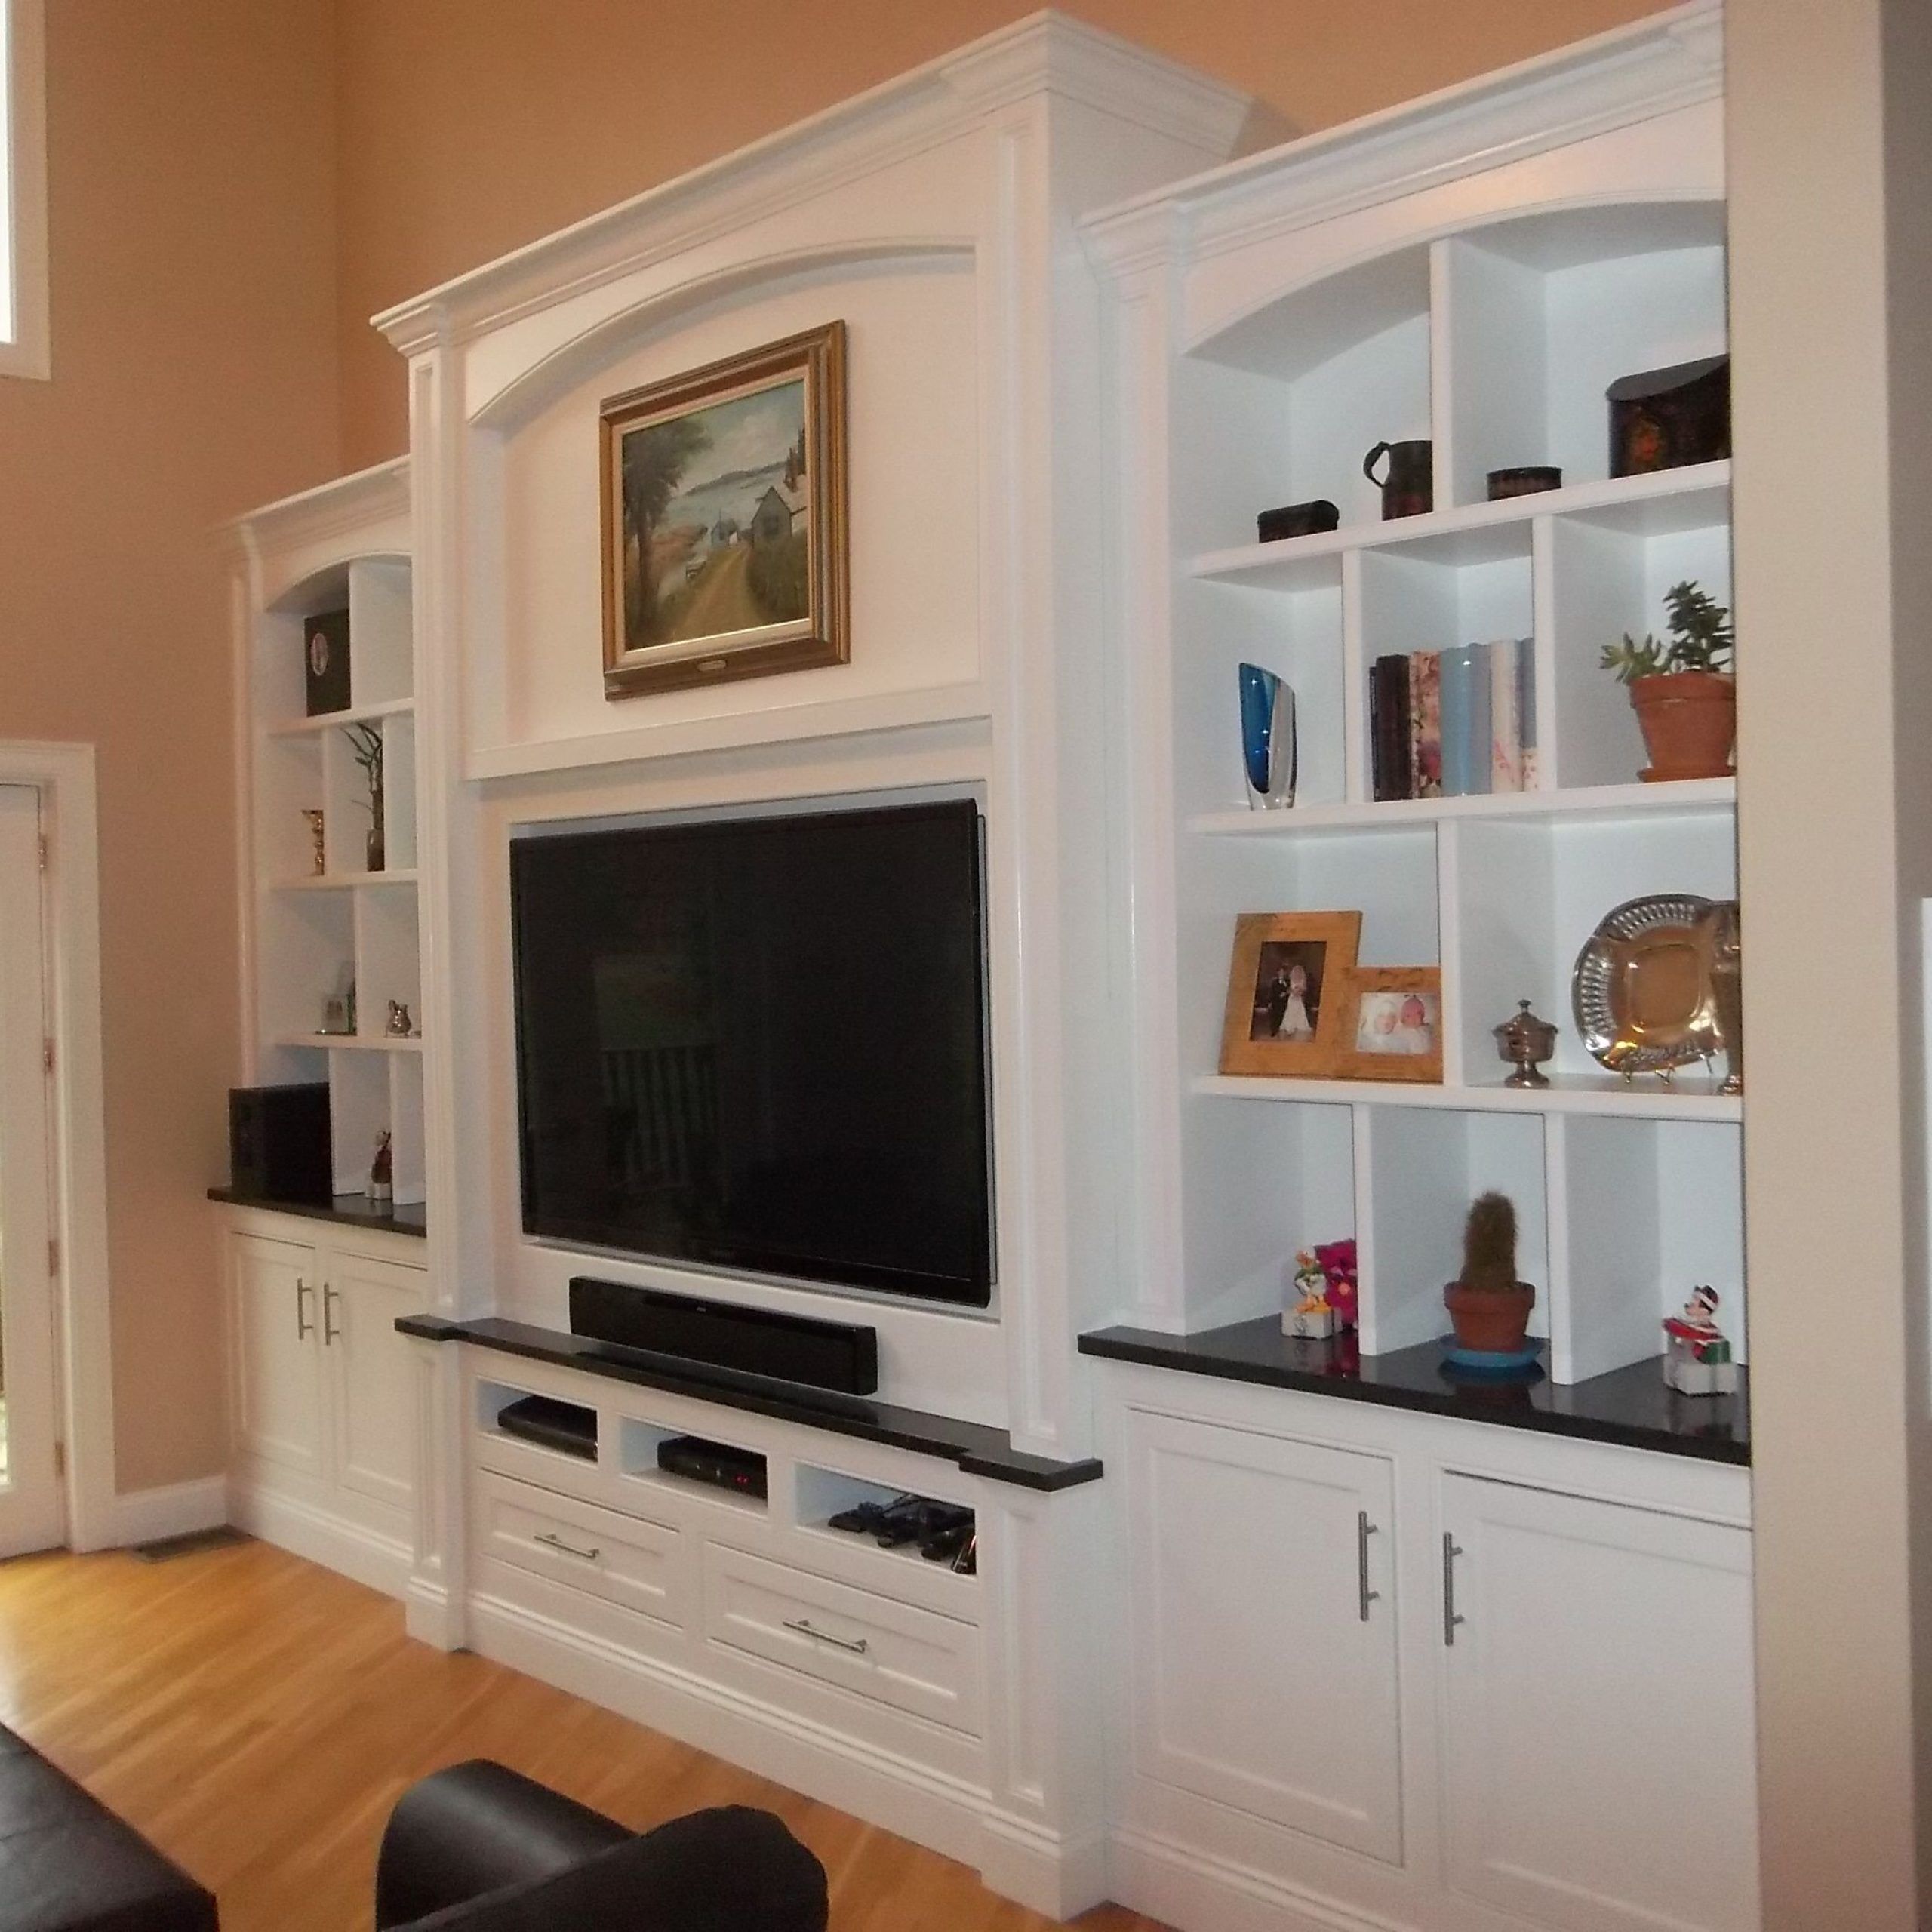 S.d.m. Custom Finish Carpentry – Home – Haverhill, Ma | Home, Tv For Wide Entertainment Centers (Gallery 1 of 20)